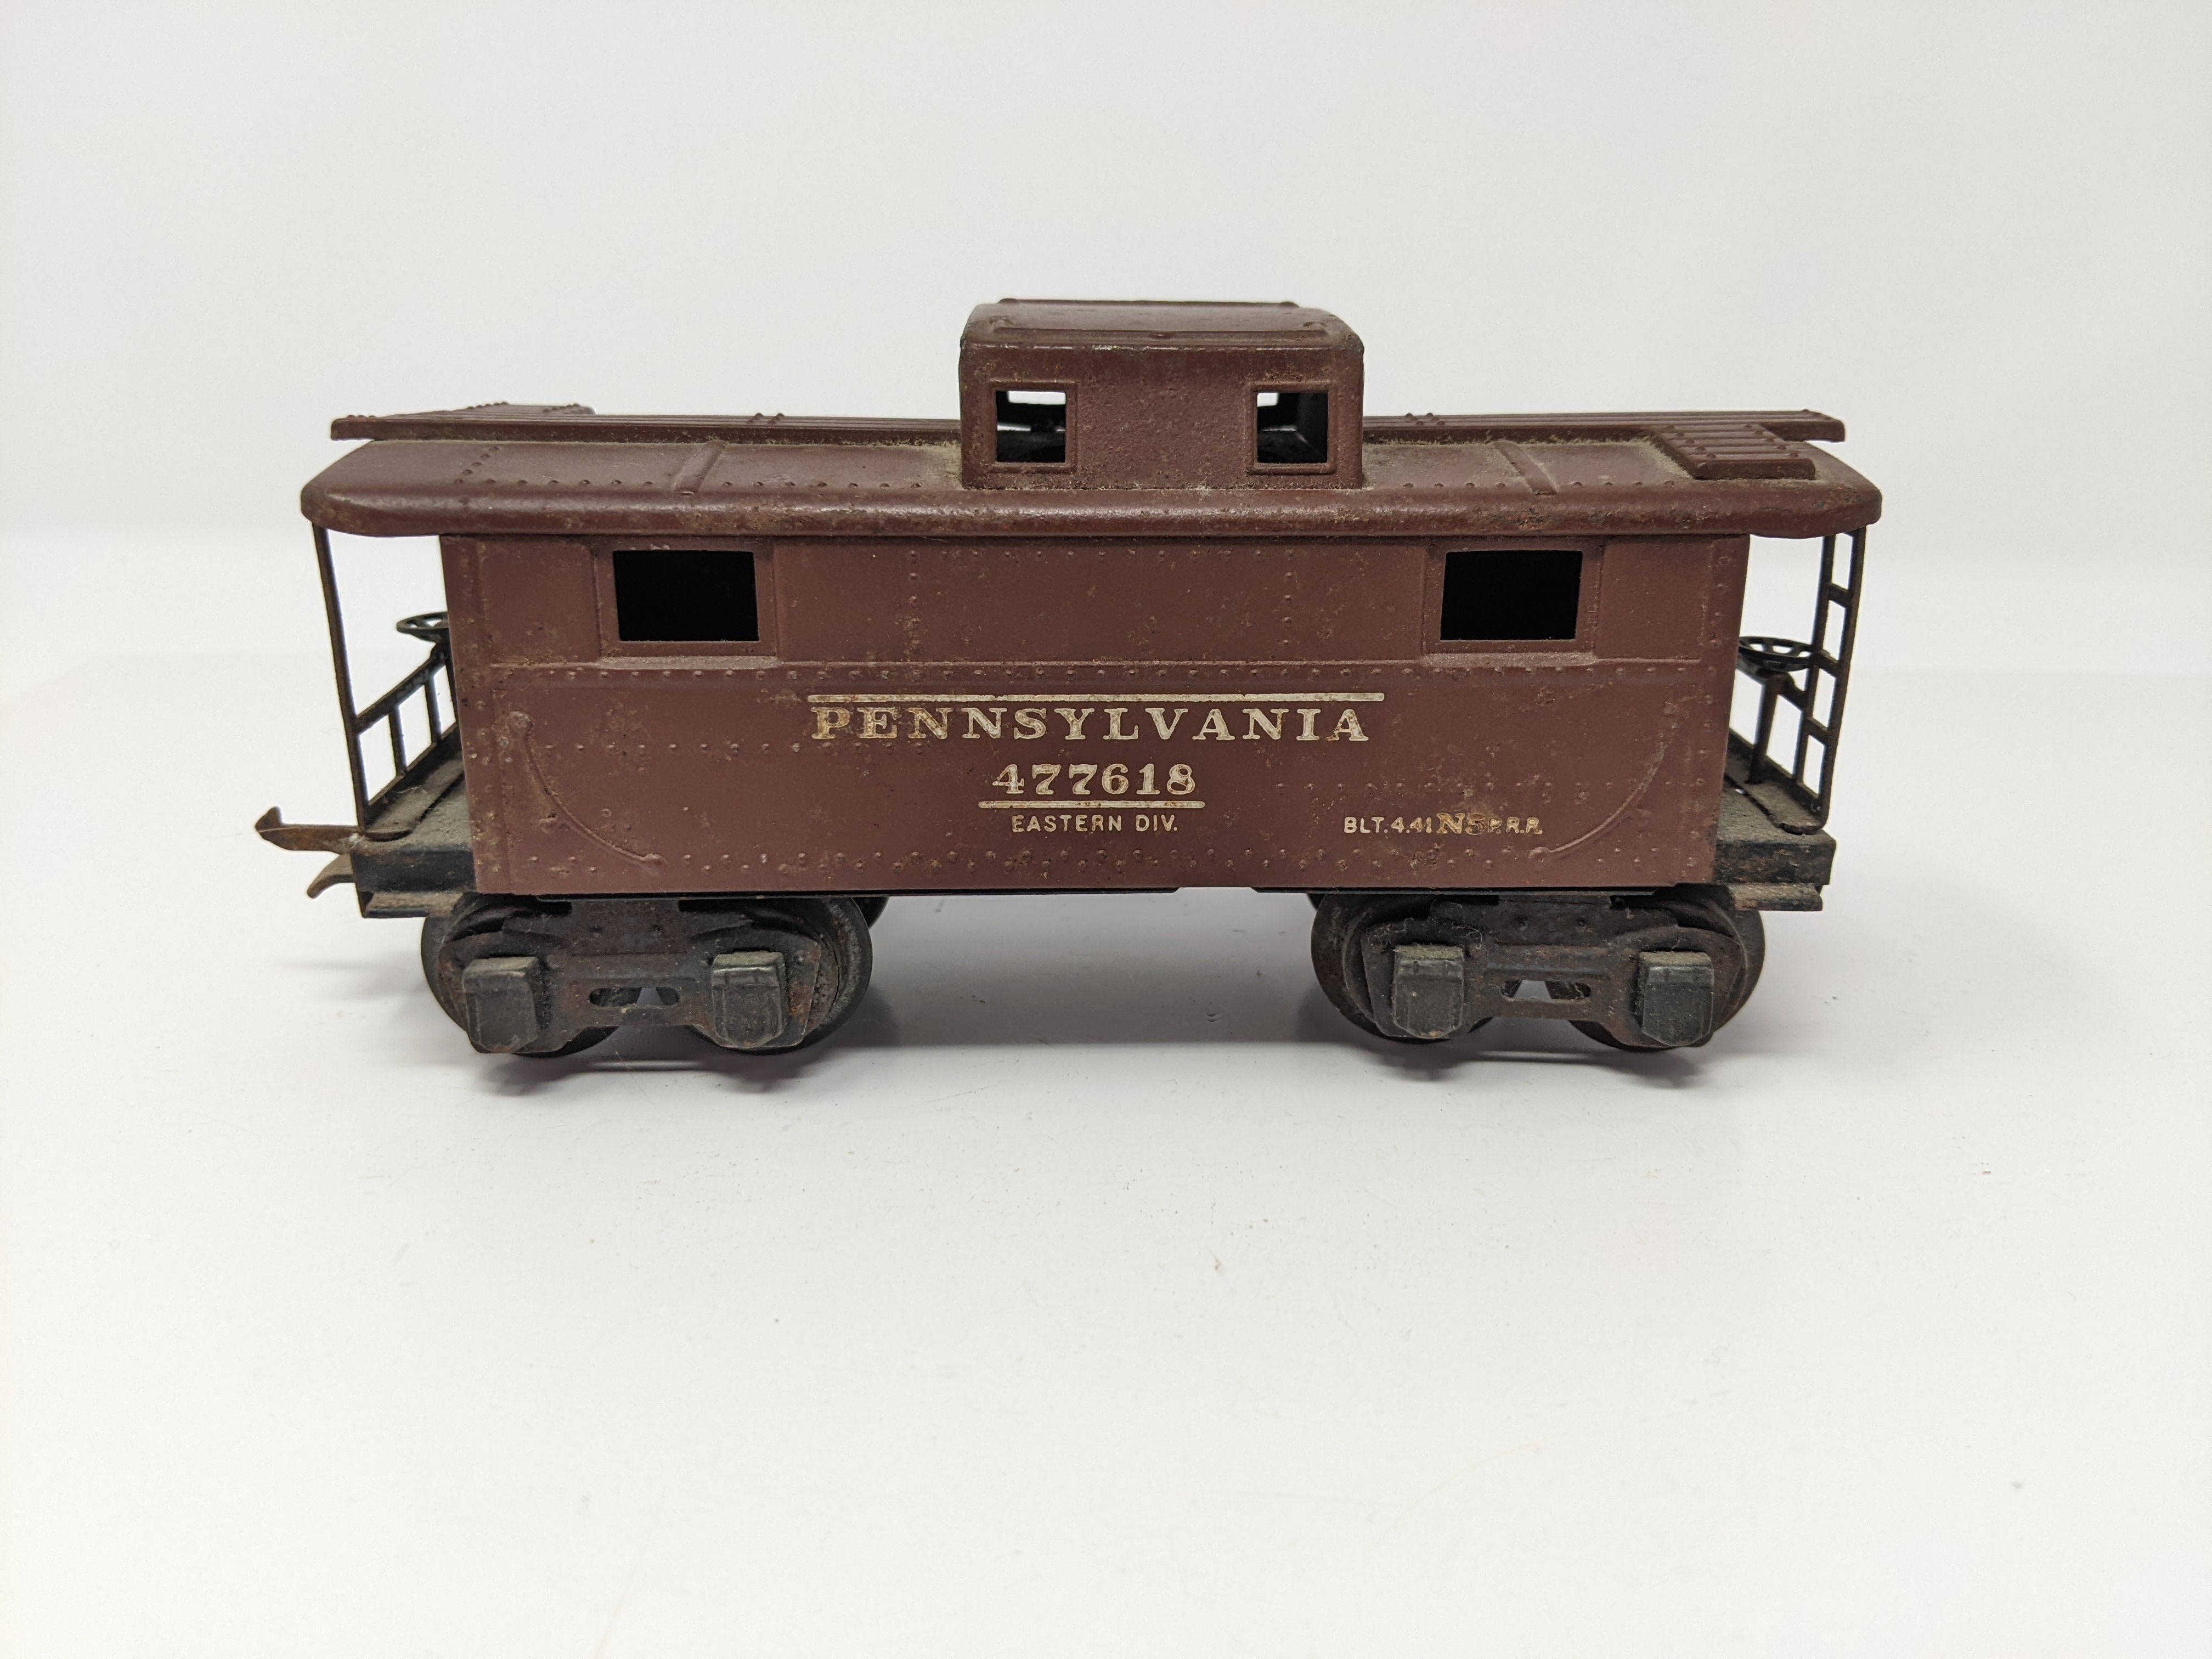 USED Lionel O, Caboose Pennsylvania #477618, Eastern Division